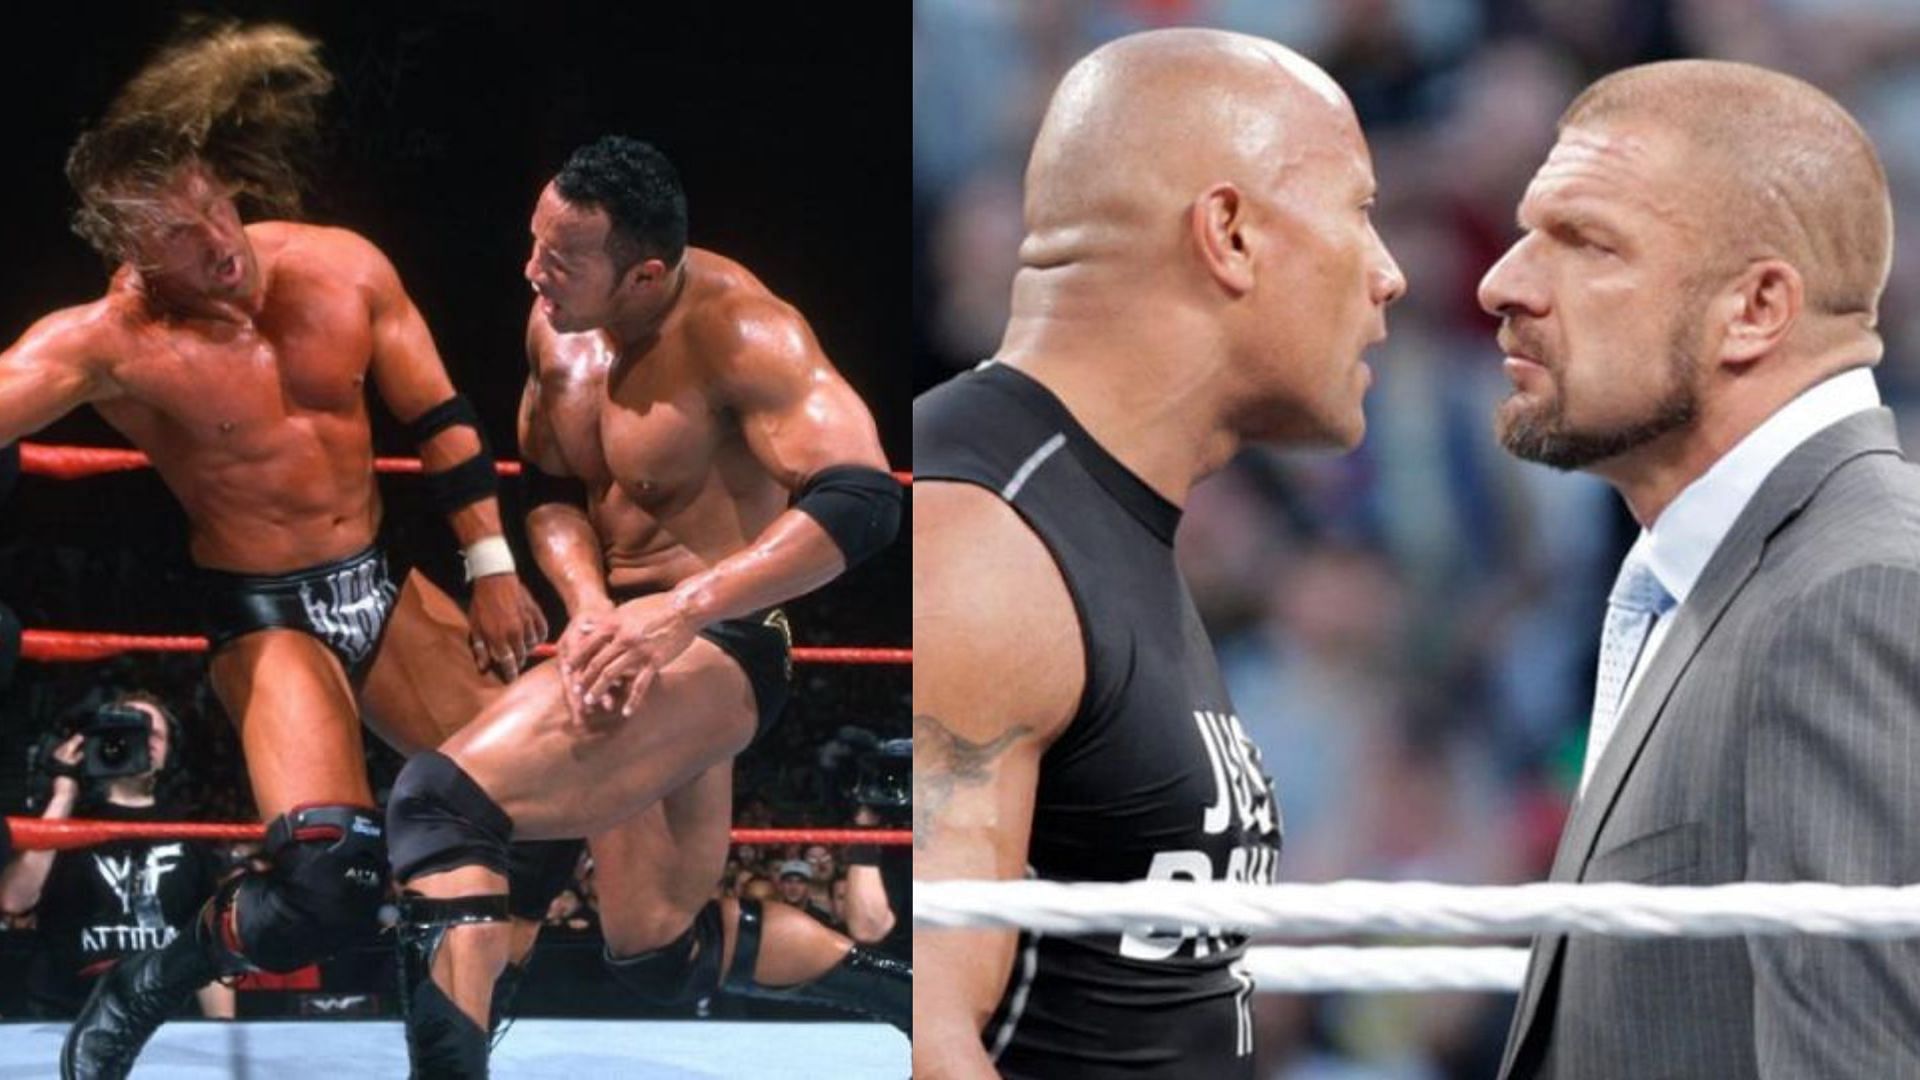 WWE veterans, Triple H and The Rock